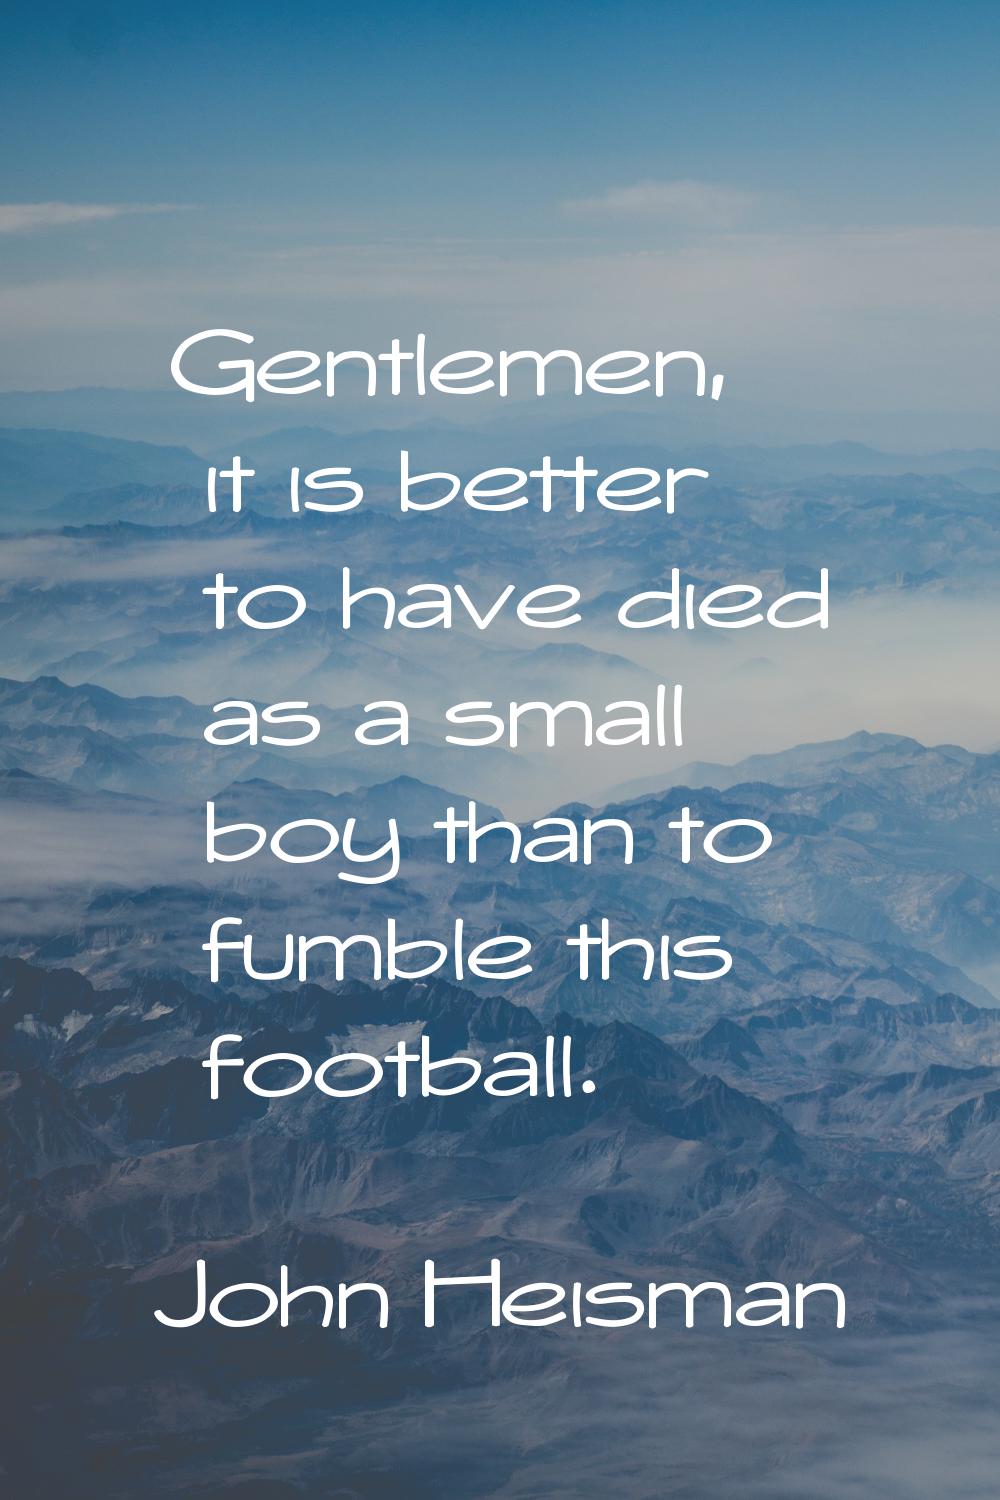 Gentlemen, it is better to have died as a small boy than to fumble this football.